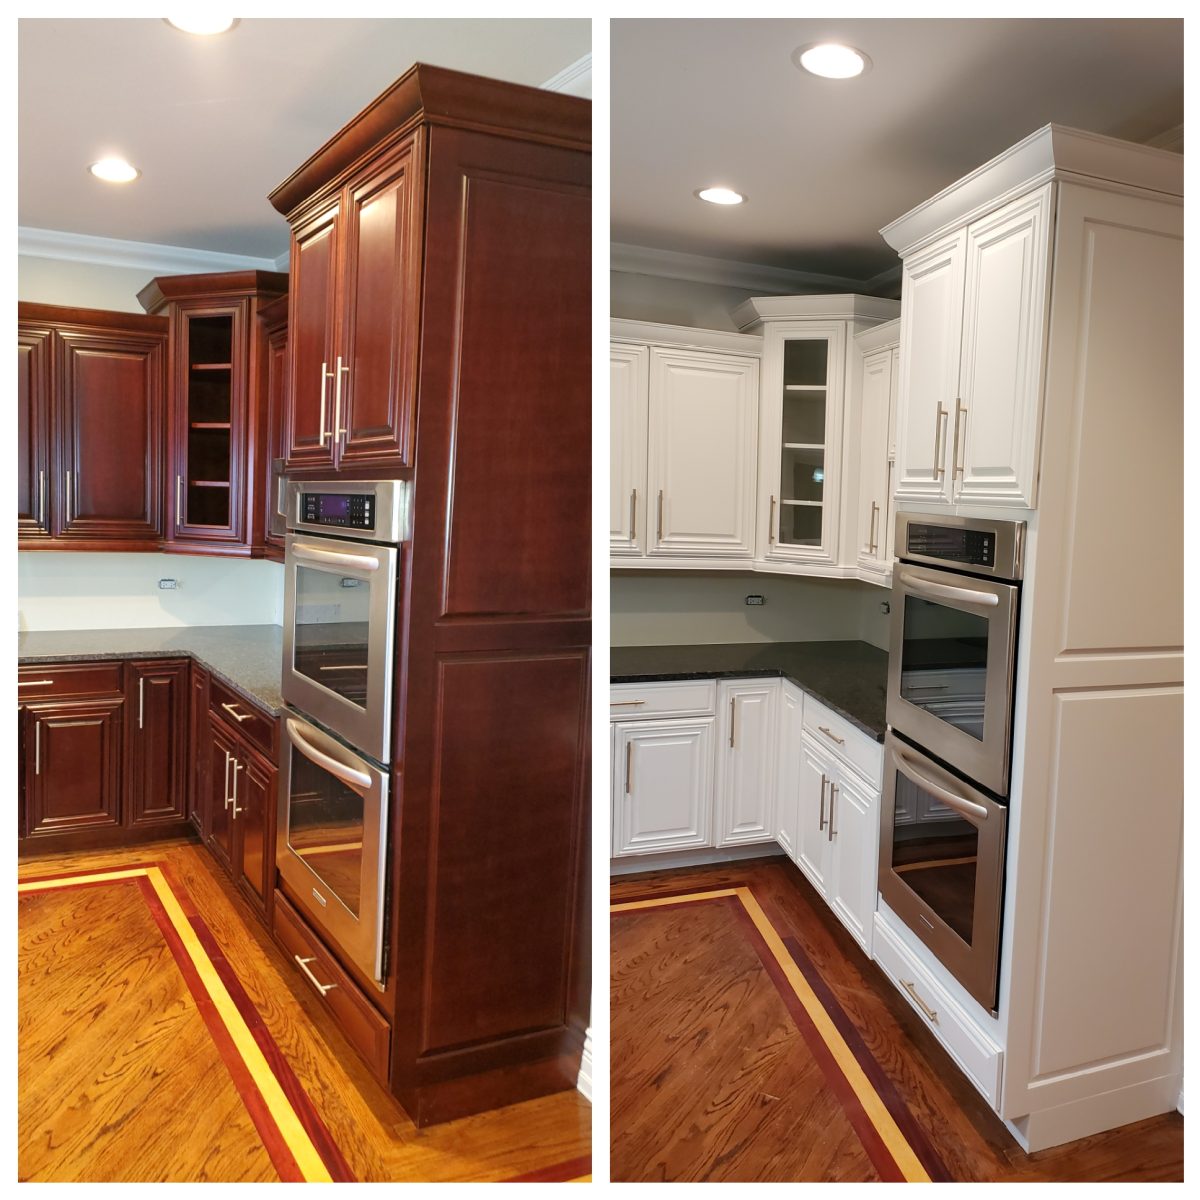 Tips For Painting Cherry Cabinets White, How To Whitewash Dark Wood Cabinets